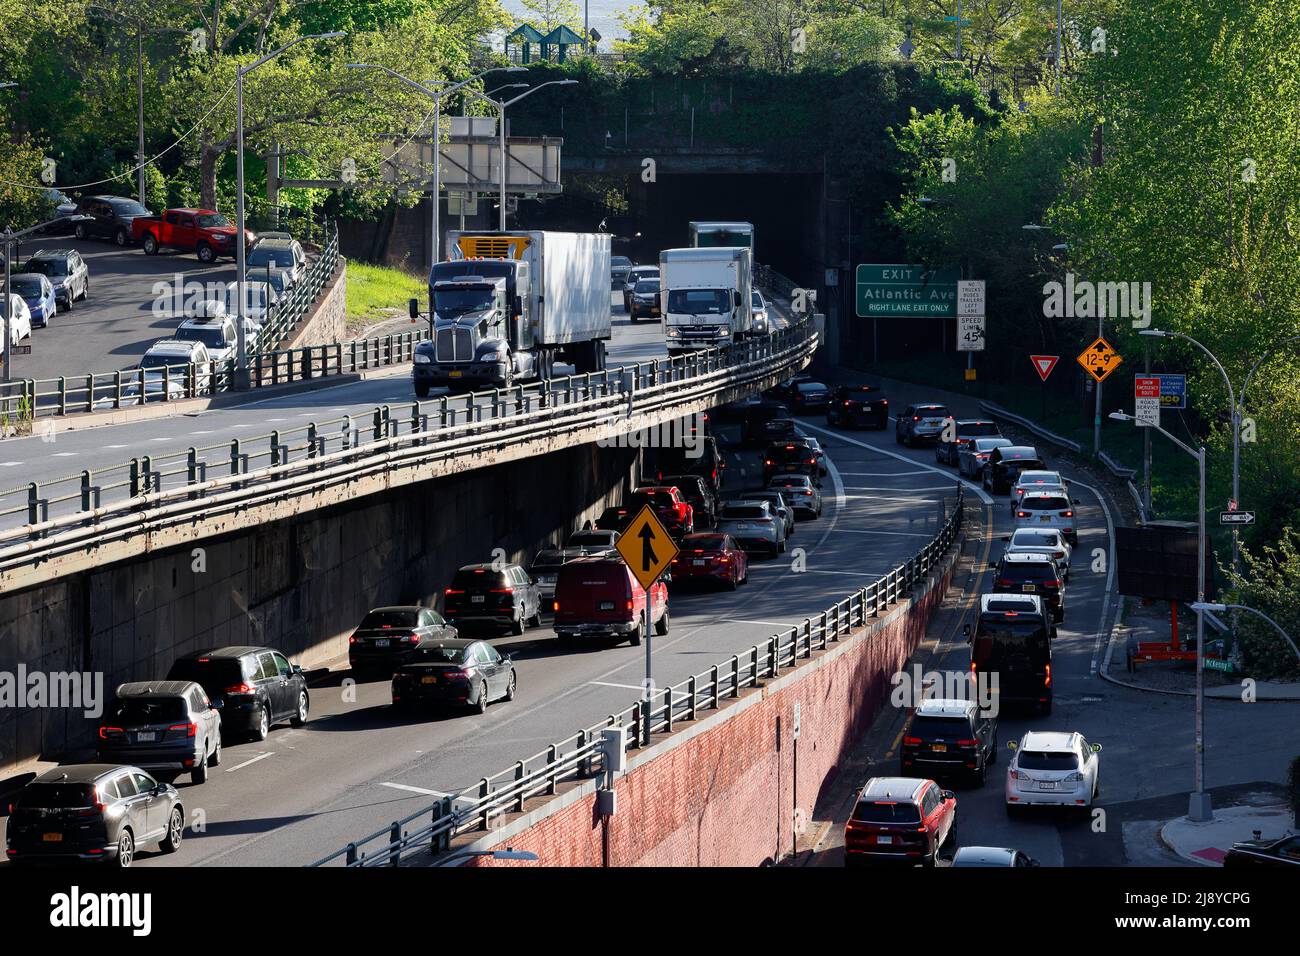 A “triple cantilever section of the Brooklyn-Queens Expressway (BQE) Interstate 278 in the Brooklyn Heights neighborhood of Brooklyn, New York. Stock Photo